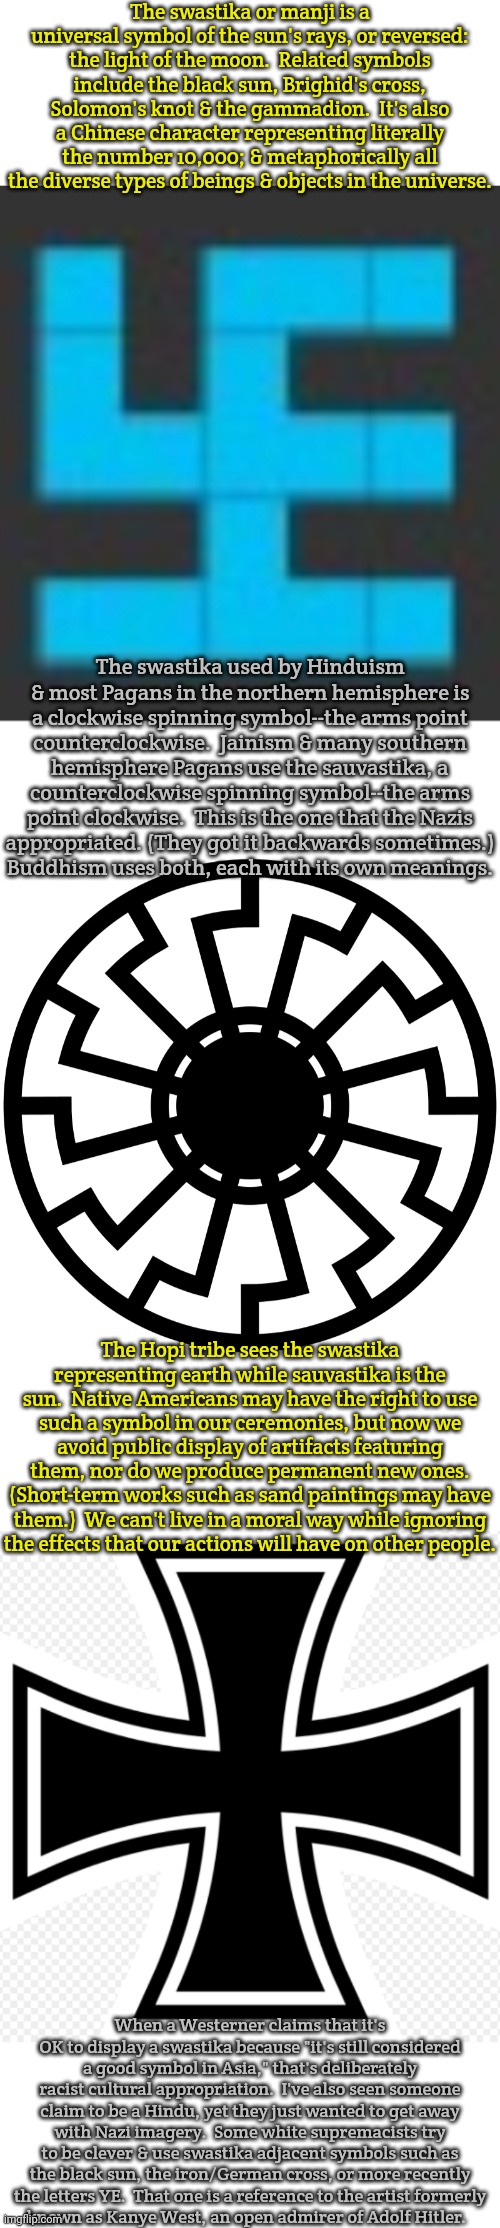 There are no actual swastikas in this meme. | The swastika or manji is a universal symbol of the sun's rays, or reversed: the light of the moon.  Related symbols include the black sun, Brighid's cross, Solomon's knot & the gammadion.  It's also a Chinese character representing literally the number 10,000; & metaphorically all the diverse types of beings & objects in the universe. The swastika used by Hinduism & most Pagans in the northern hemisphere is a clockwise spinning symbol--the arms point counterclockwise.  Jainism & many southern hemisphere Pagans use the sauvastika, a counterclockwise spinning symbol--the arms point clockwise.  This is the one that the Nazis
appropriated. (They got it backwards sometimes.)
Buddhism uses both, each with its own meanings. The Hopi tribe sees the swastika representing earth while sauvastika is the sun.  Native Americans may have the right to use such a symbol in our ceremonies, but now we avoid public display of artifacts featuring them, nor do we produce permanent new ones. (Short-term works such as sand paintings may have them.)  We can't live in a moral way while ignoring
the effects that our actions will have on other people. When a Westerner claims that it's OK to display a swastika because "it's still considered a good symbol in Asia," that's deliberately racist cultural appropriation.  I've also seen someone claim to be a Hindu, yet they just wanted to get away with Nazi imagery.  Some white supremacists try to be clever & use swastika adjacent symbols such as the black sun, the iron/German cross, or more recently the letters YE.  That one is a reference to the artist formerly
known as Kanye West, an open admirer of Adolf Hitler. | image tagged in swastikaguy,black sun,more iron cross,history of the world,white supremacists,hate speech | made w/ Imgflip meme maker